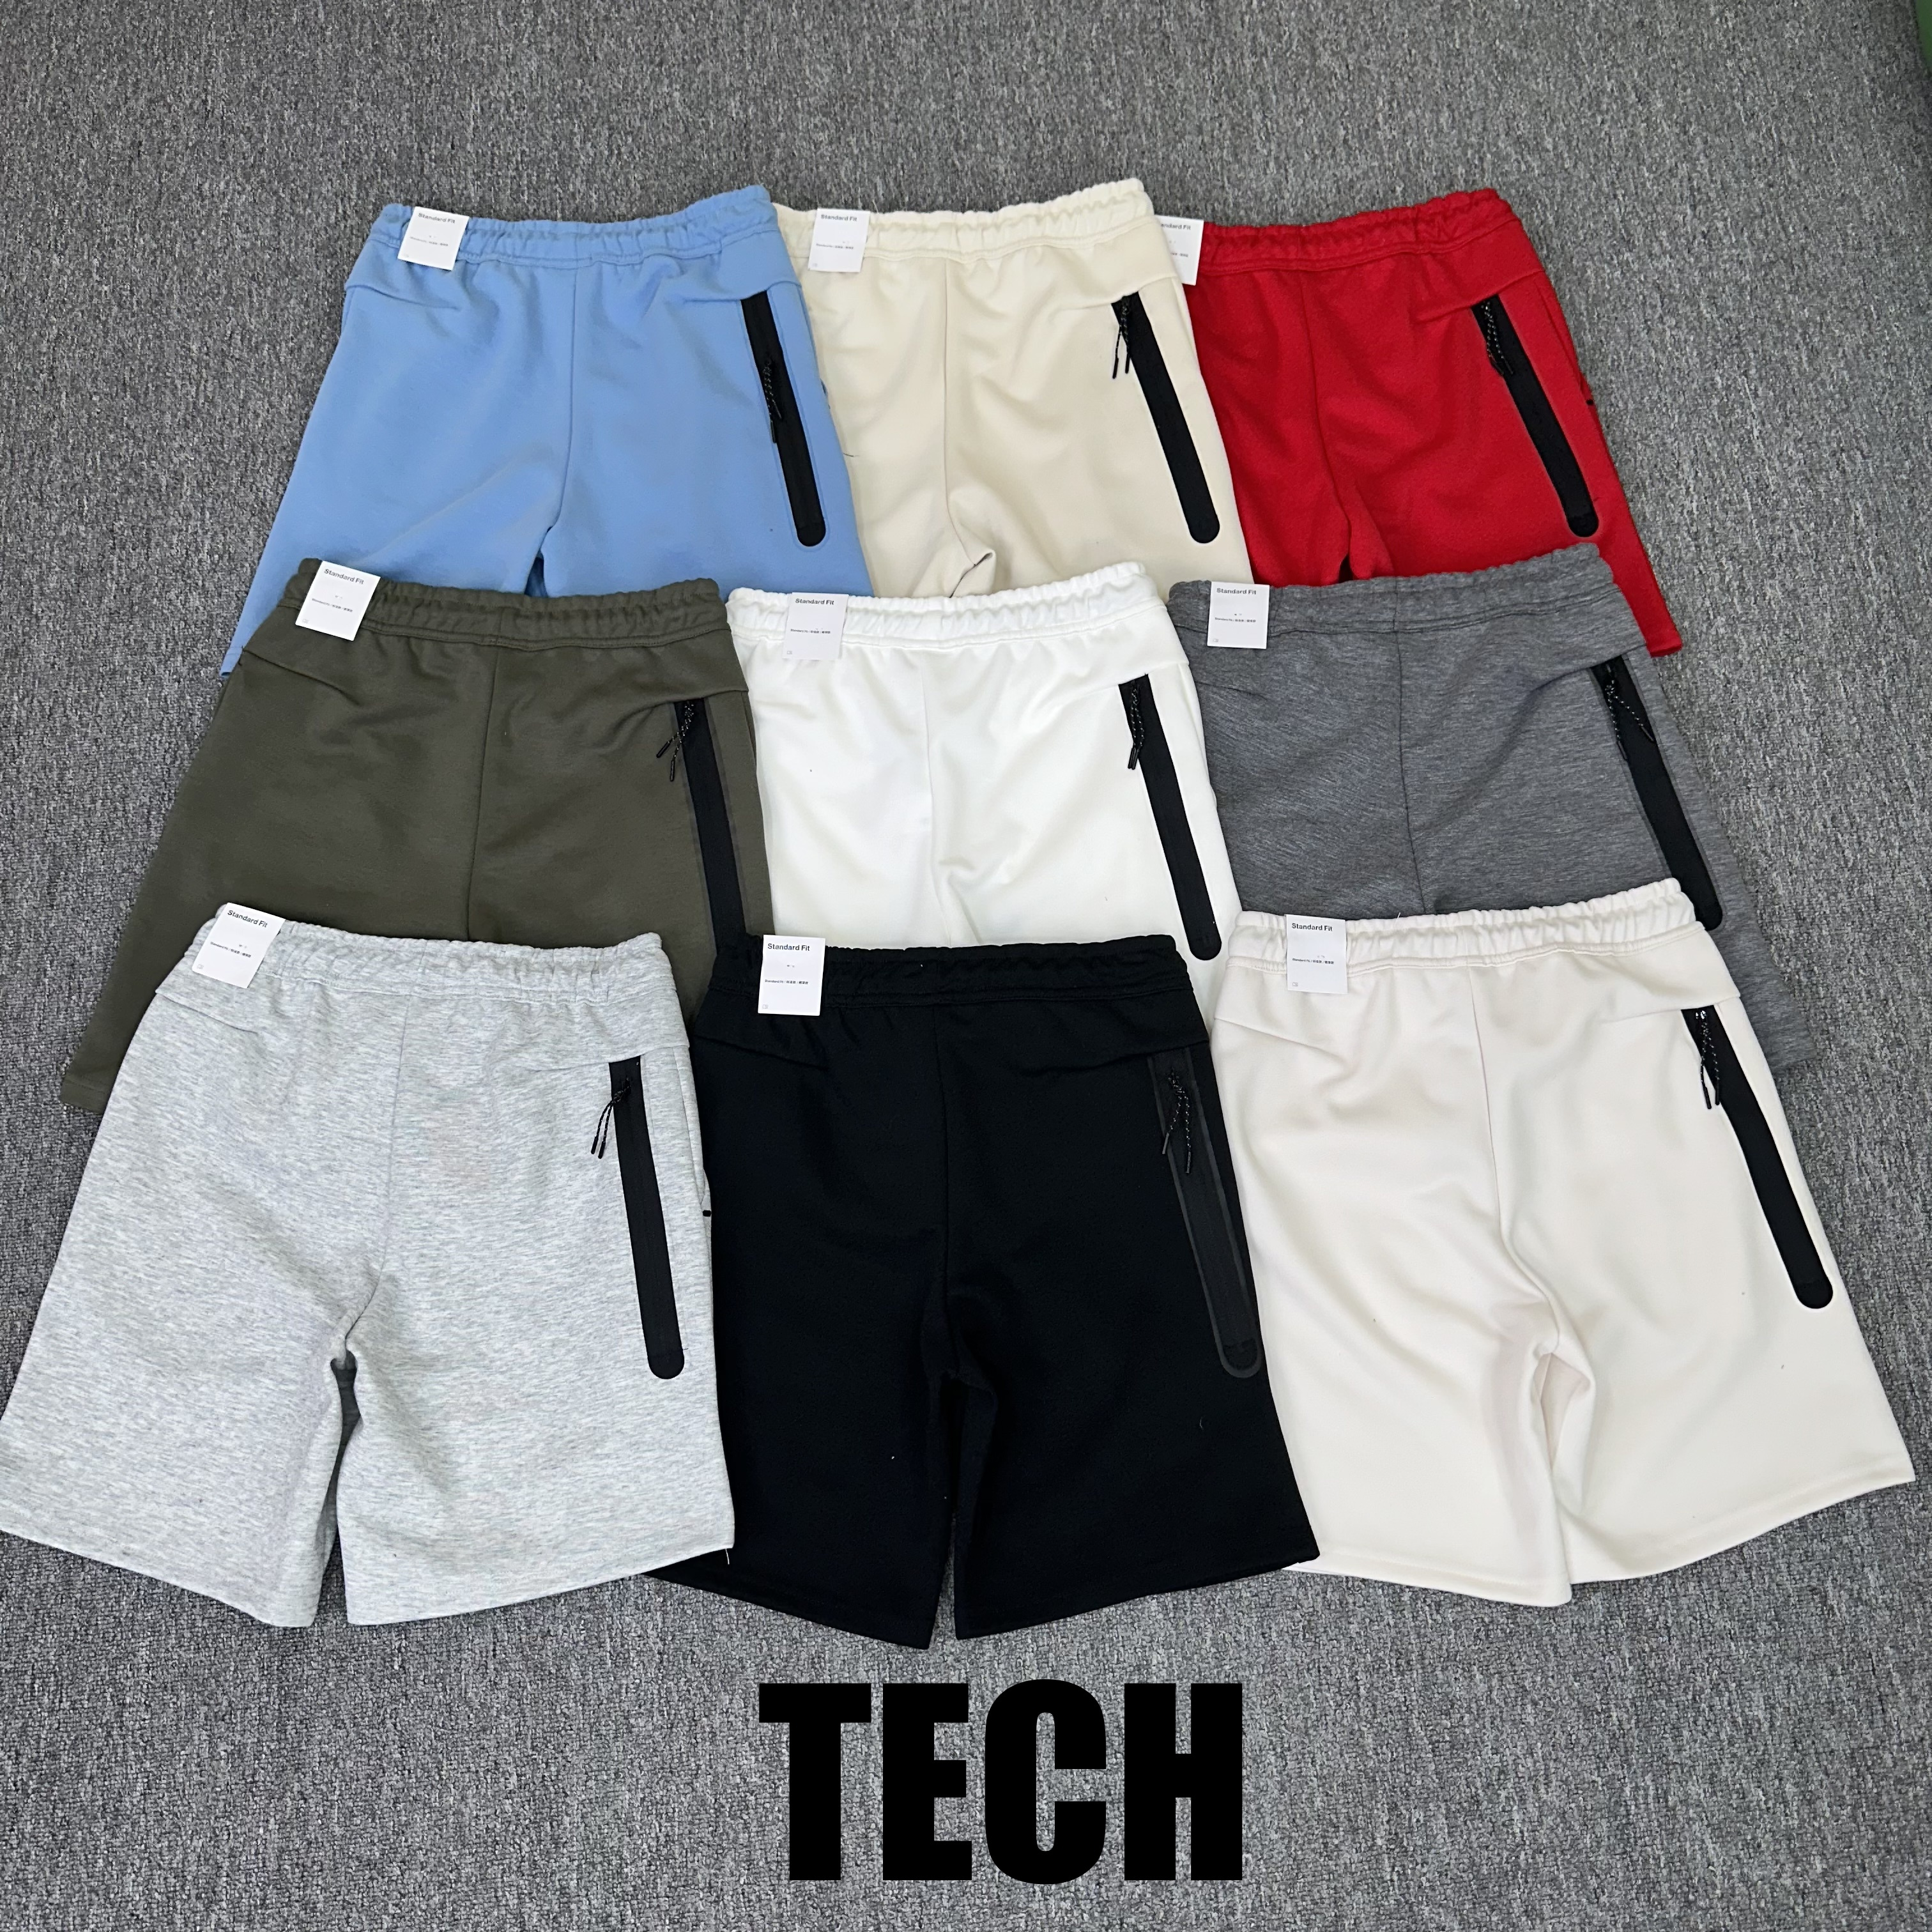 

tech fleeces shorts mens womens designers short letter printing strip webbing casual hoodies tracksuits clothes summer beach clothing techfleeces